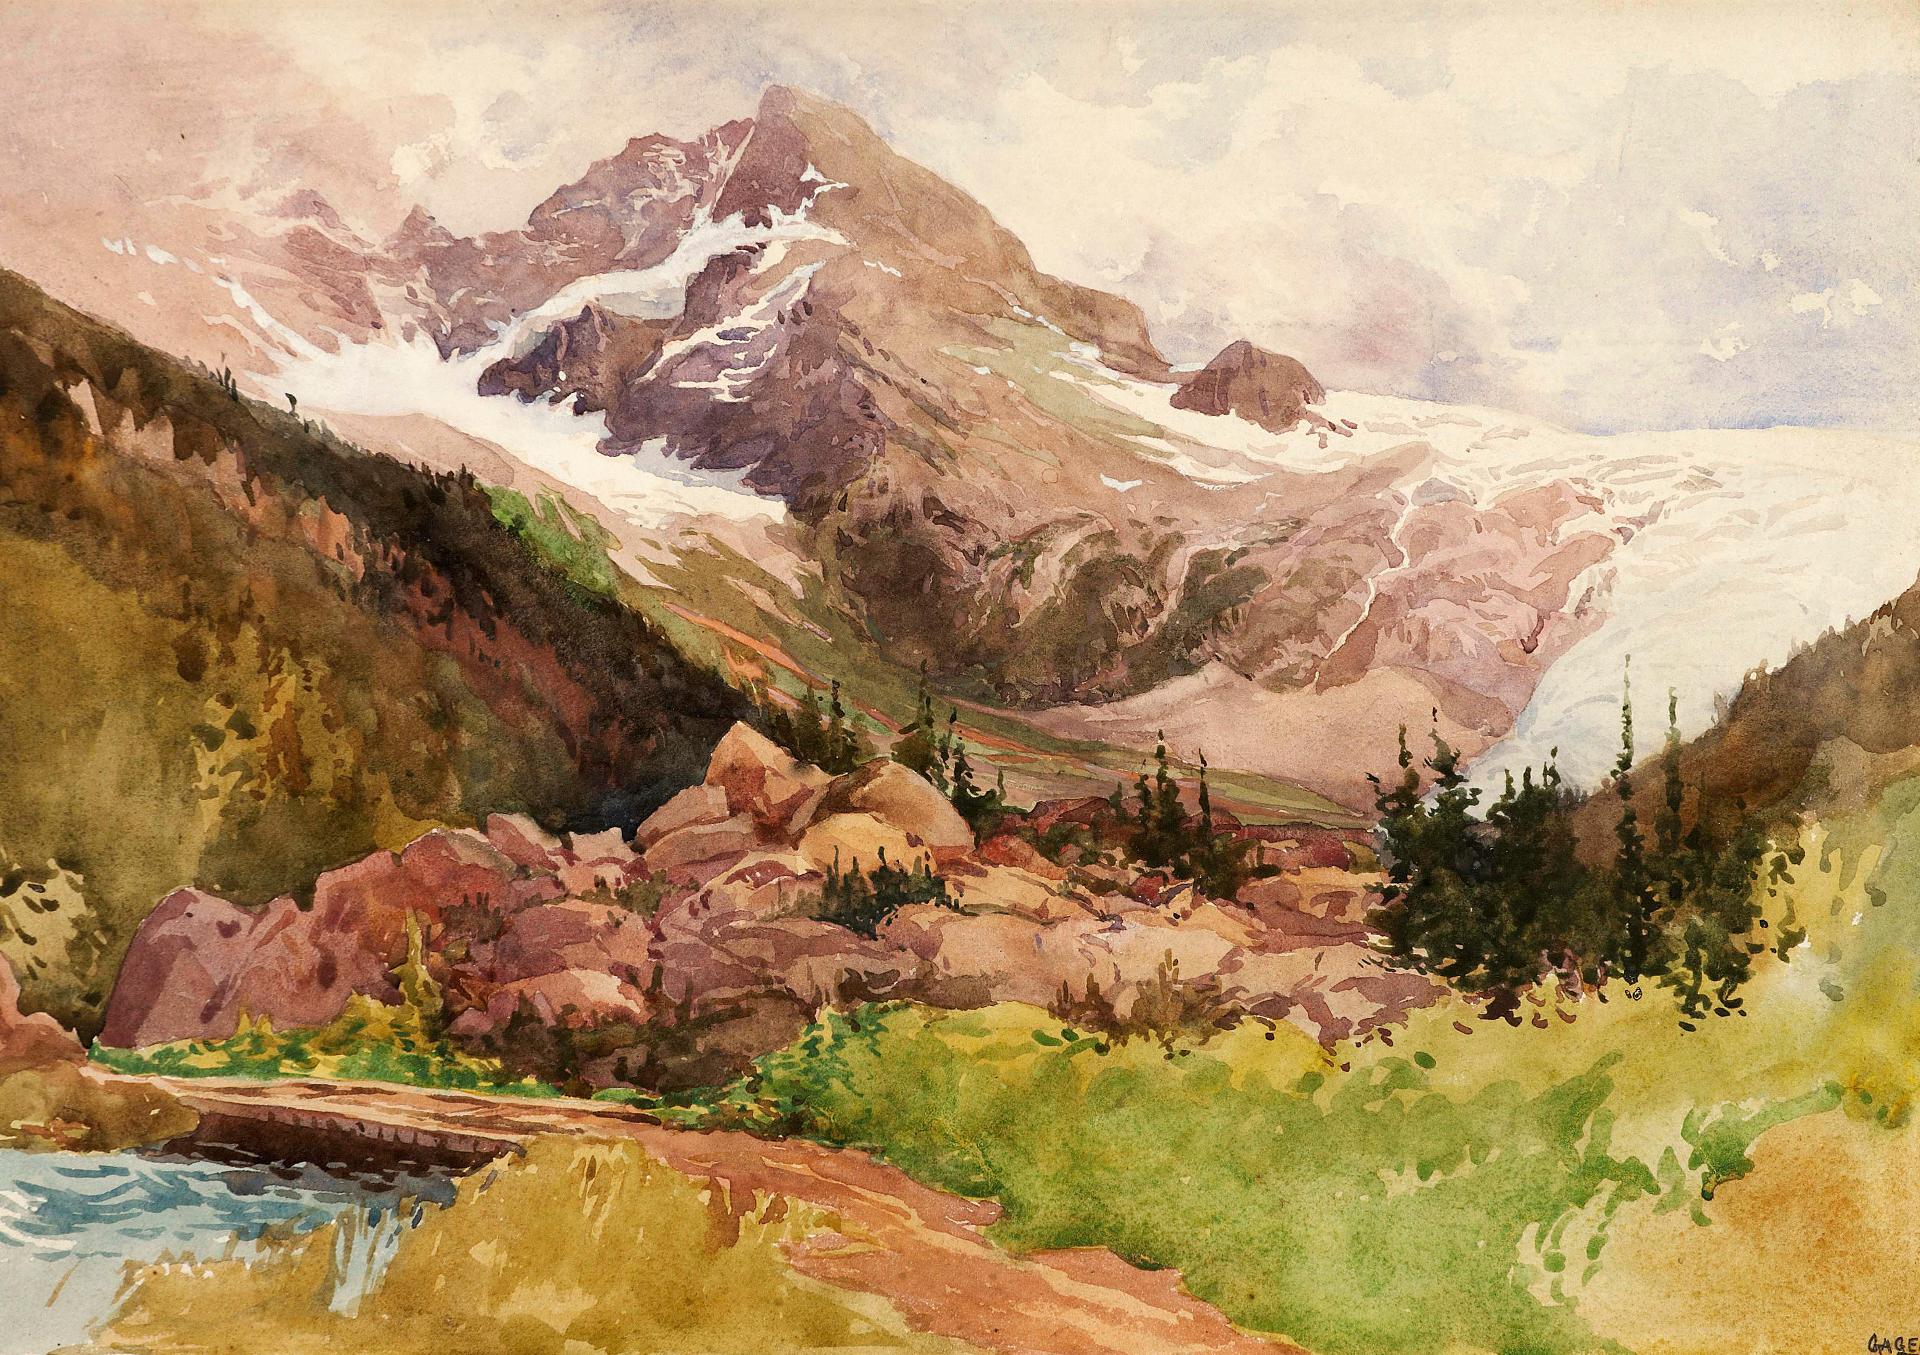 Robert Ford Gagen (1847-1926) - In Our Rockies